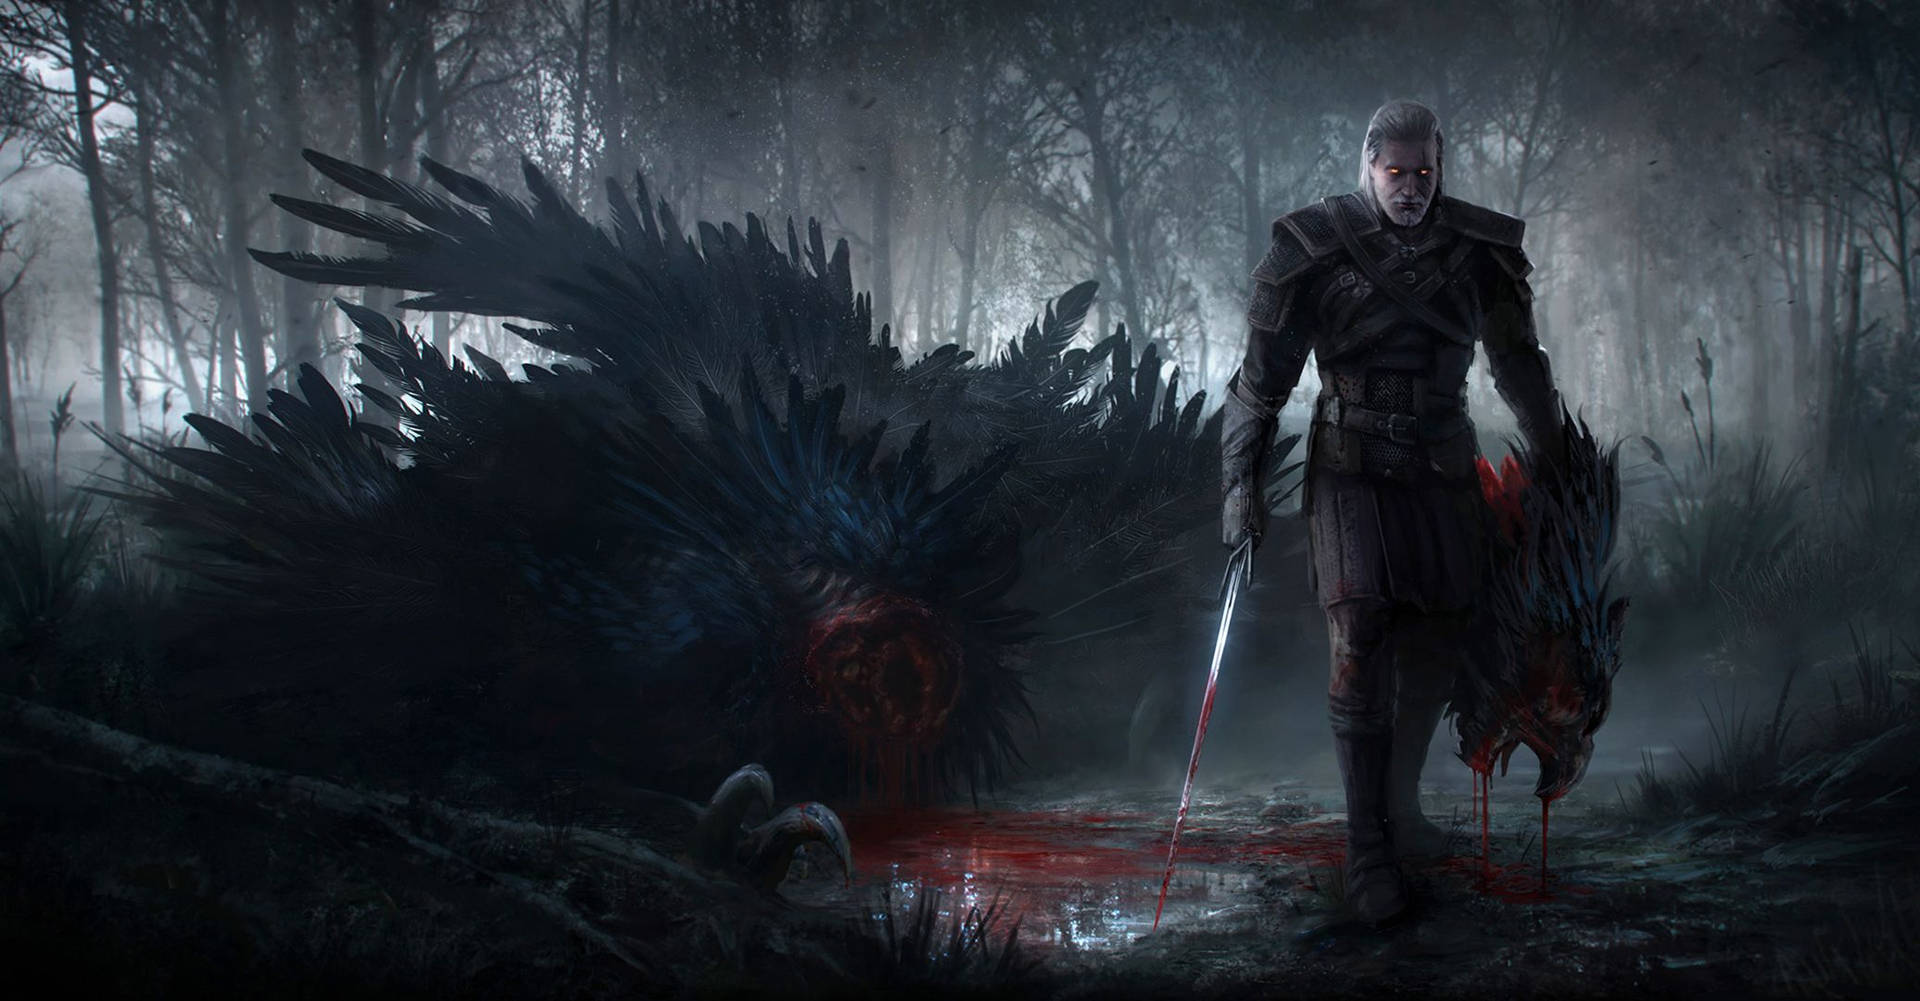 Embark on an Epic journey with Geralt of Rivia in The Witcher 3: Wild Hunt Wallpaper